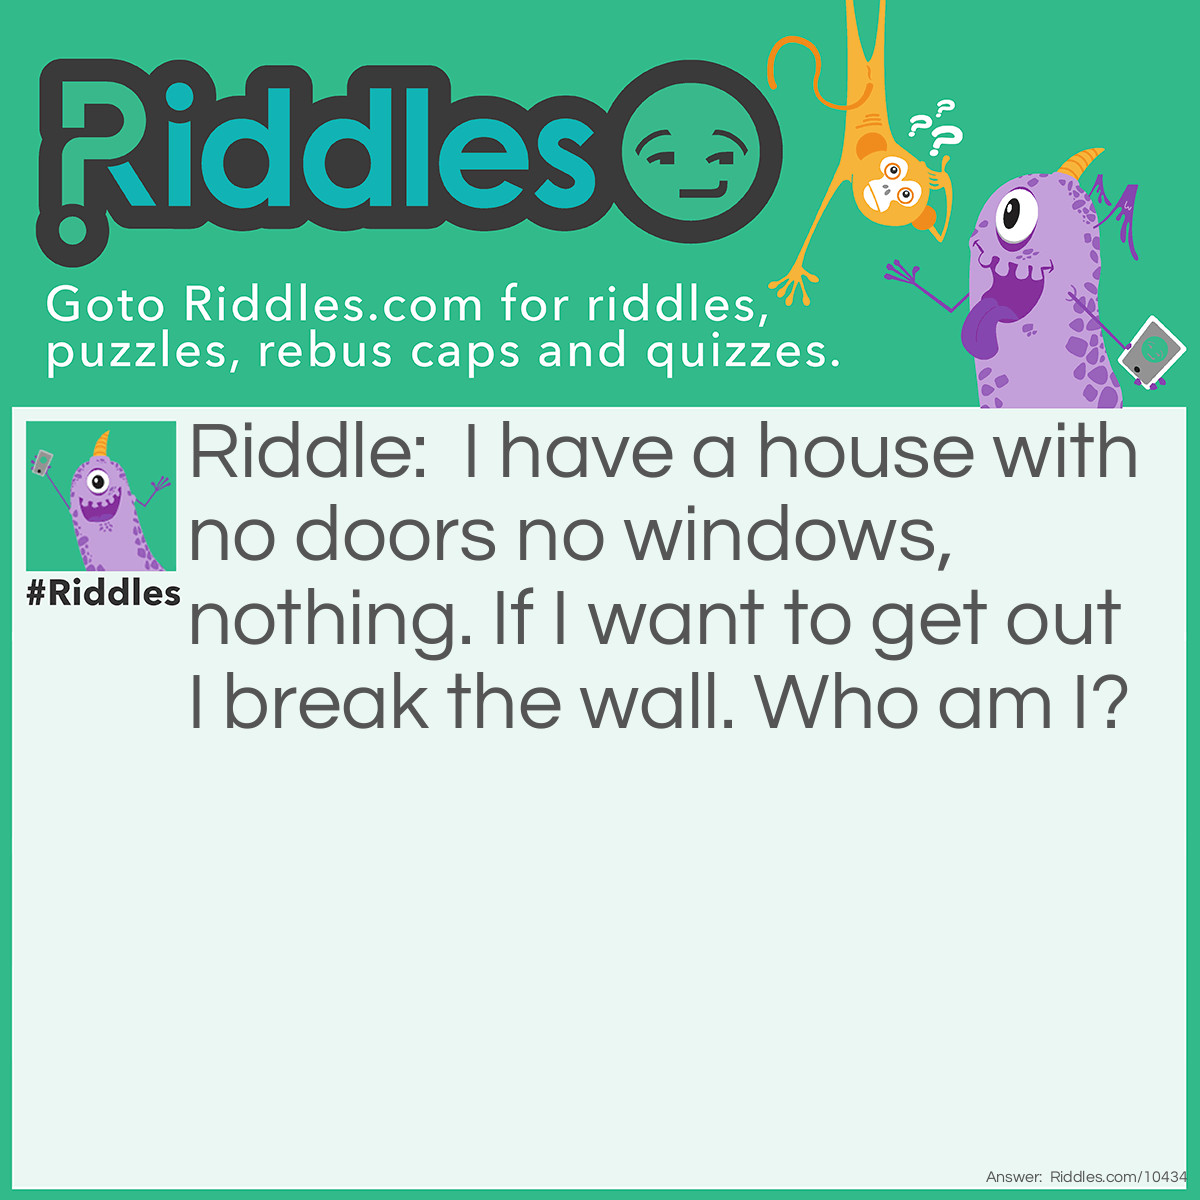 Riddle: I have a house with no doors no windows, nothing. If I want to get out I break the wall. Who am I? Answer: Chicken as if it wants to come out it breaks the wall.